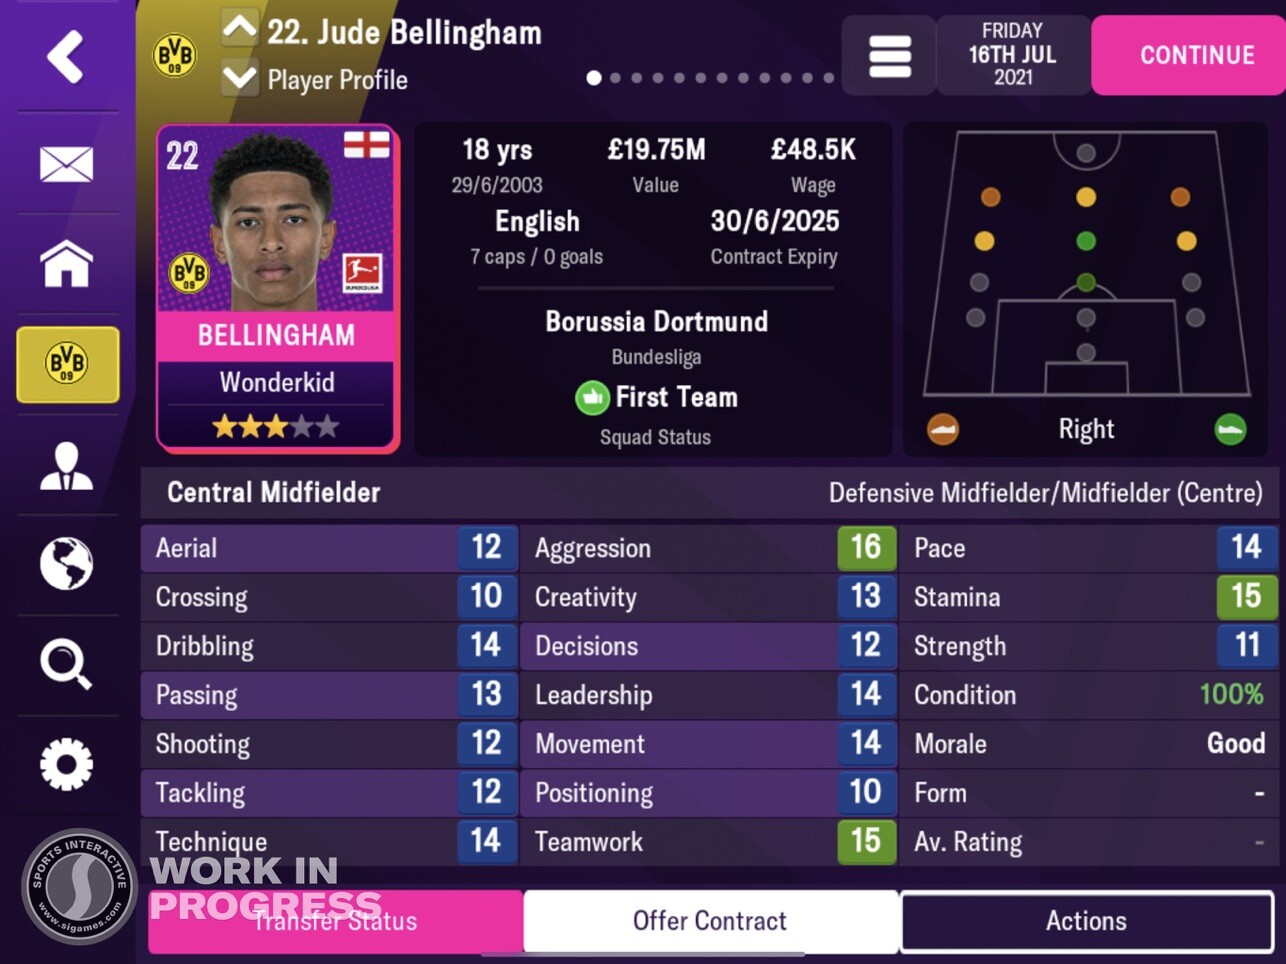 Football manager 2022 mobile. Football Manager 2022 Player profile.